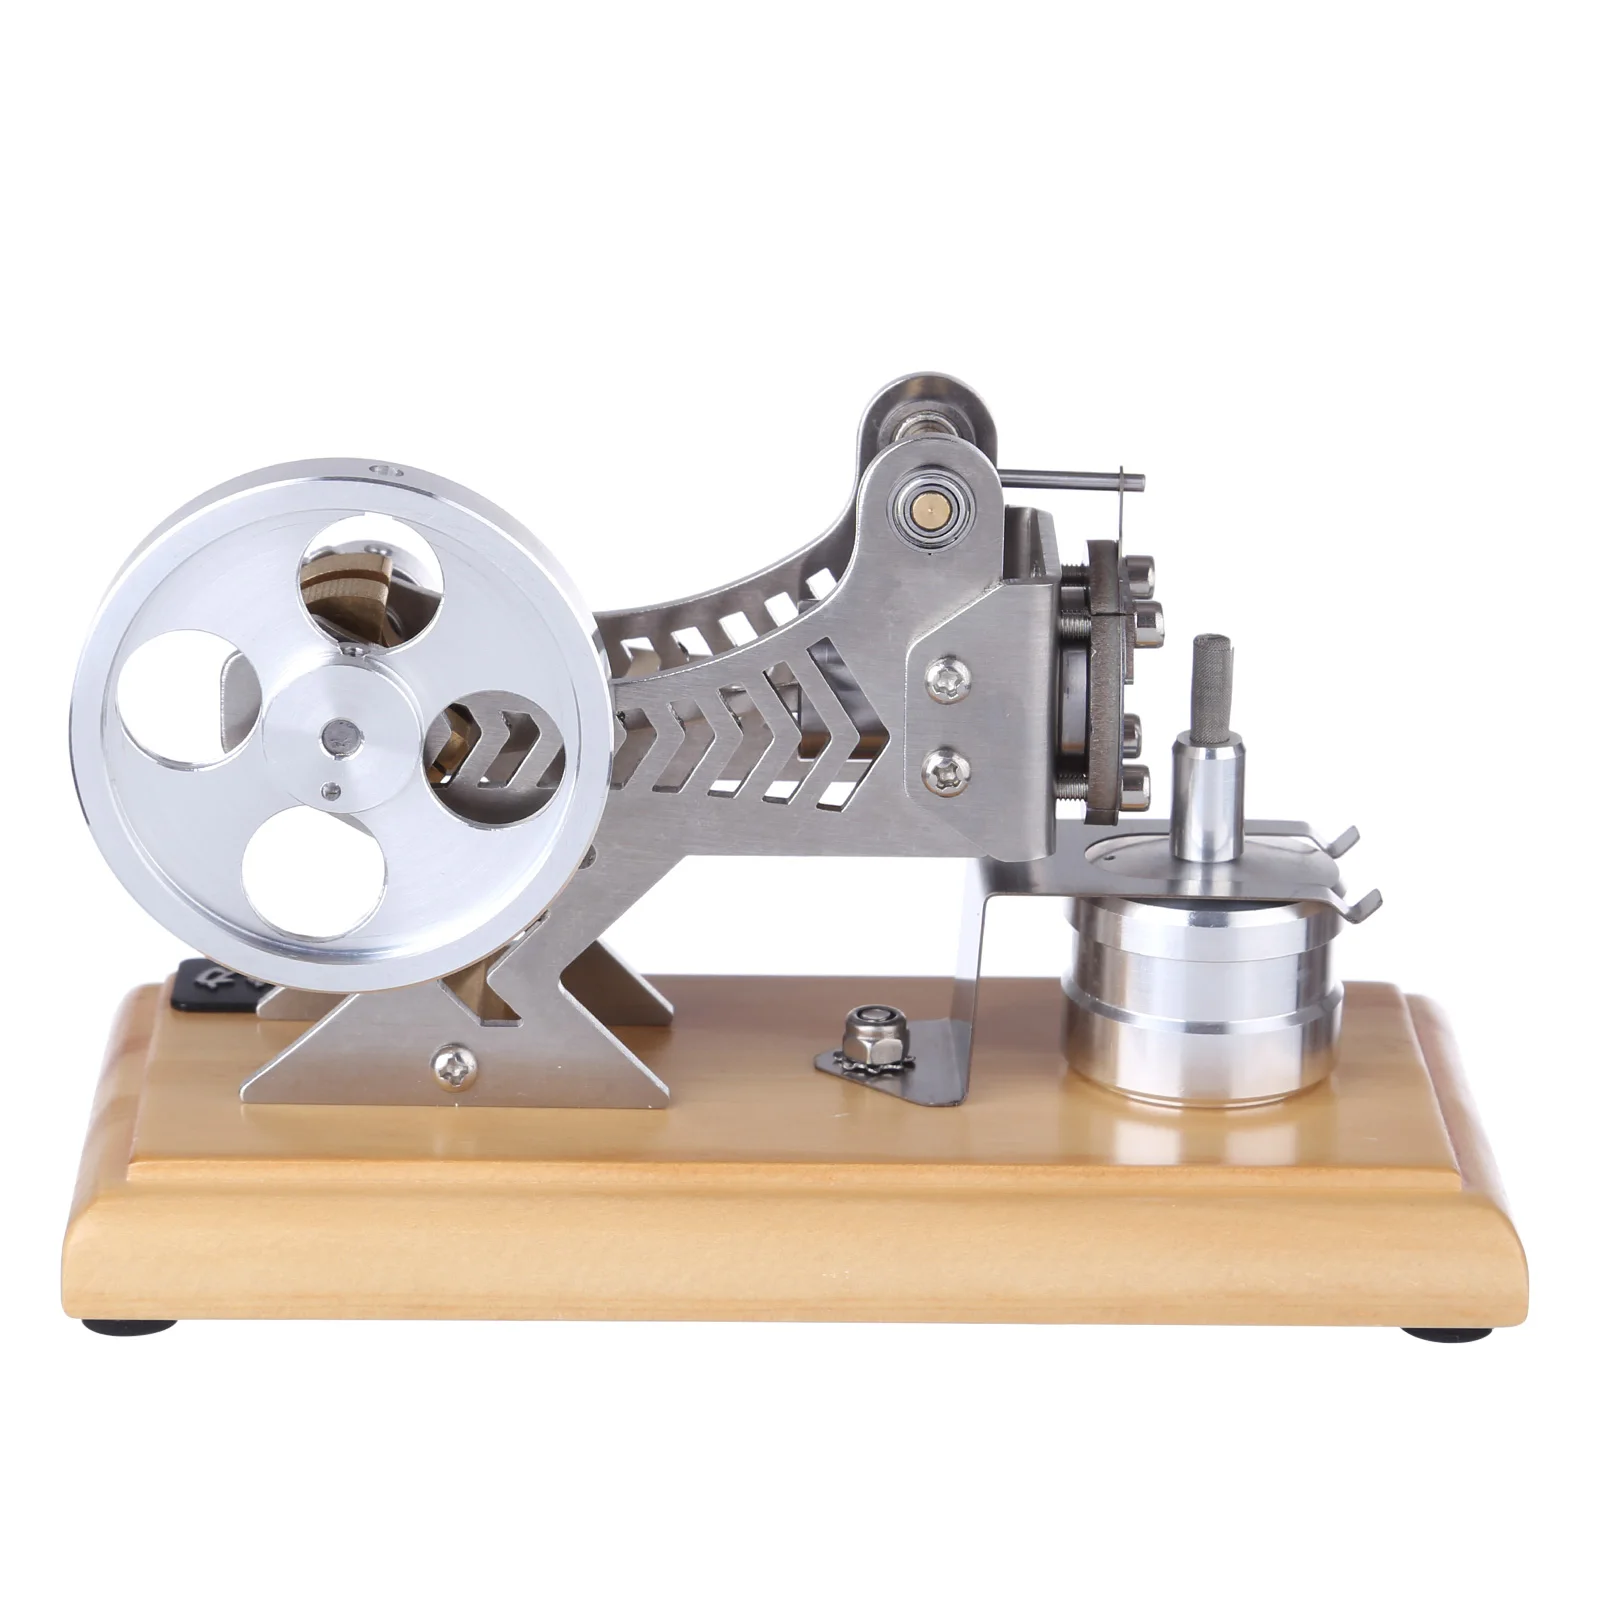 Hot Air Stirling Engine Motor Model Scientific Physics Education Toy Metal Frame Wood Base Experimental Equipment